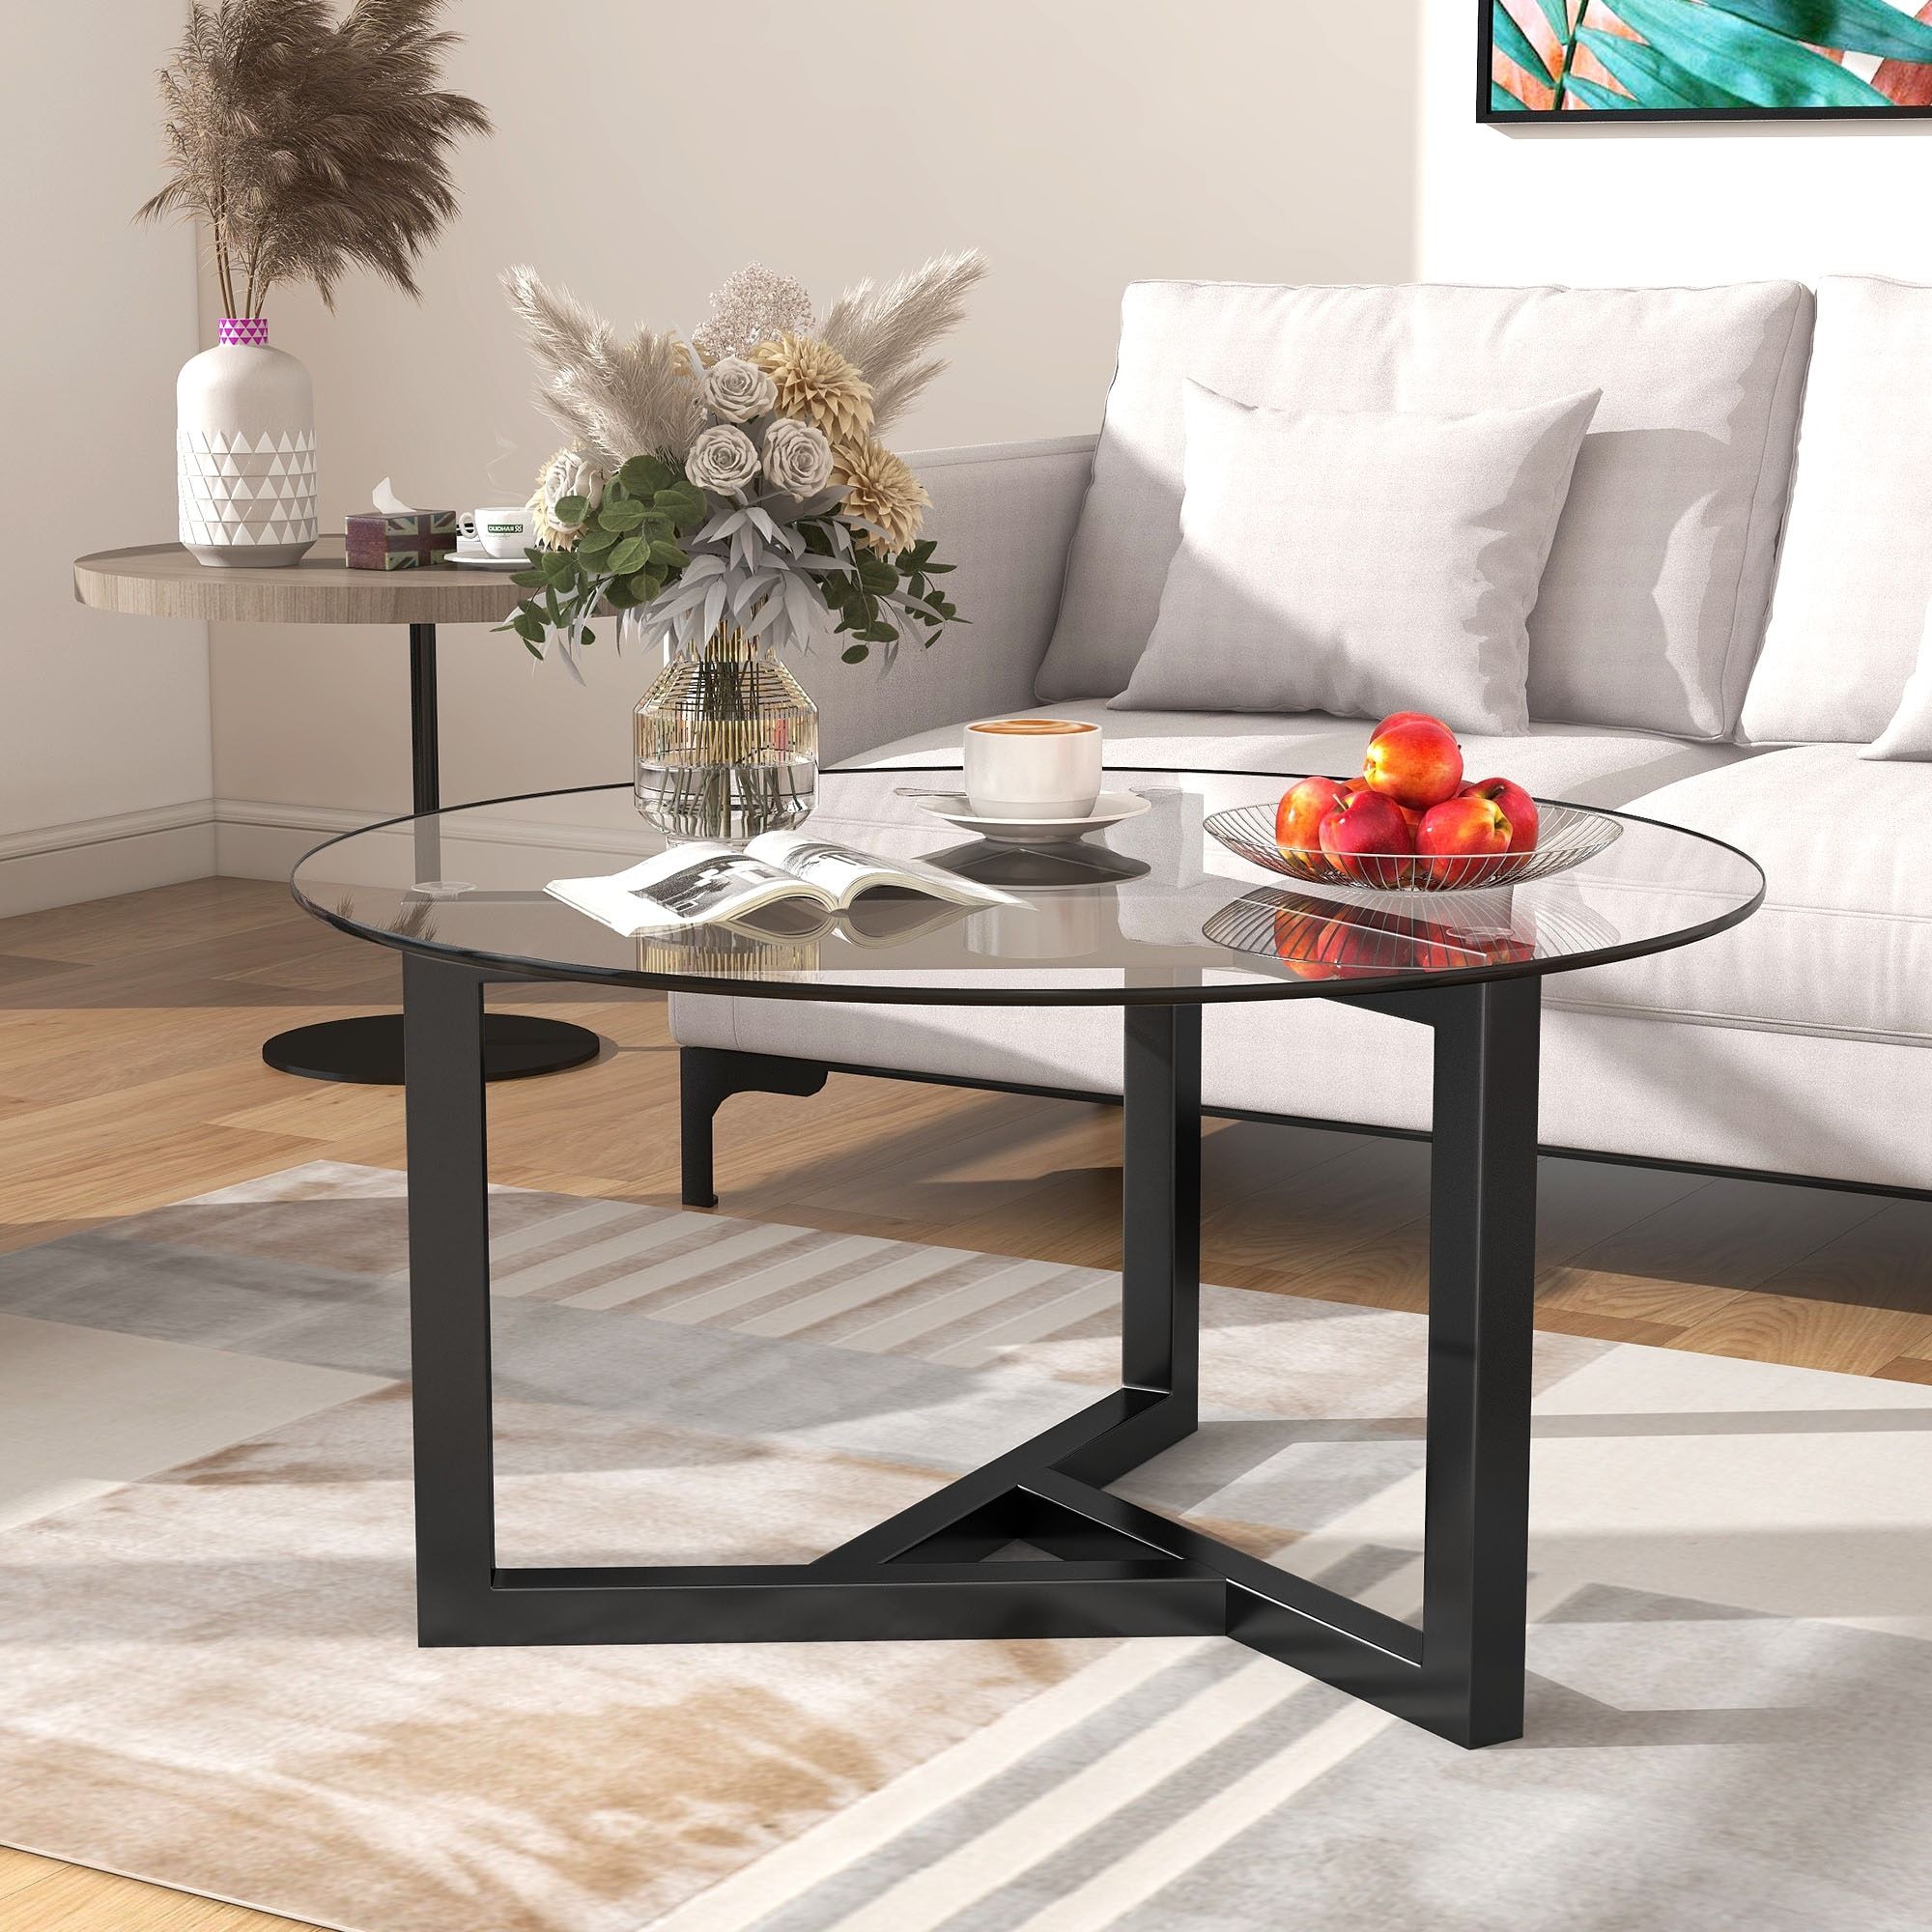 Round Glass Coffee Table With Tempered Glass Top & Sturdy Wood Base – Bed  Bath & Beyond – 36580619 Inside Wood Tempered Glass Top Coffee Tables (View 7 of 15)